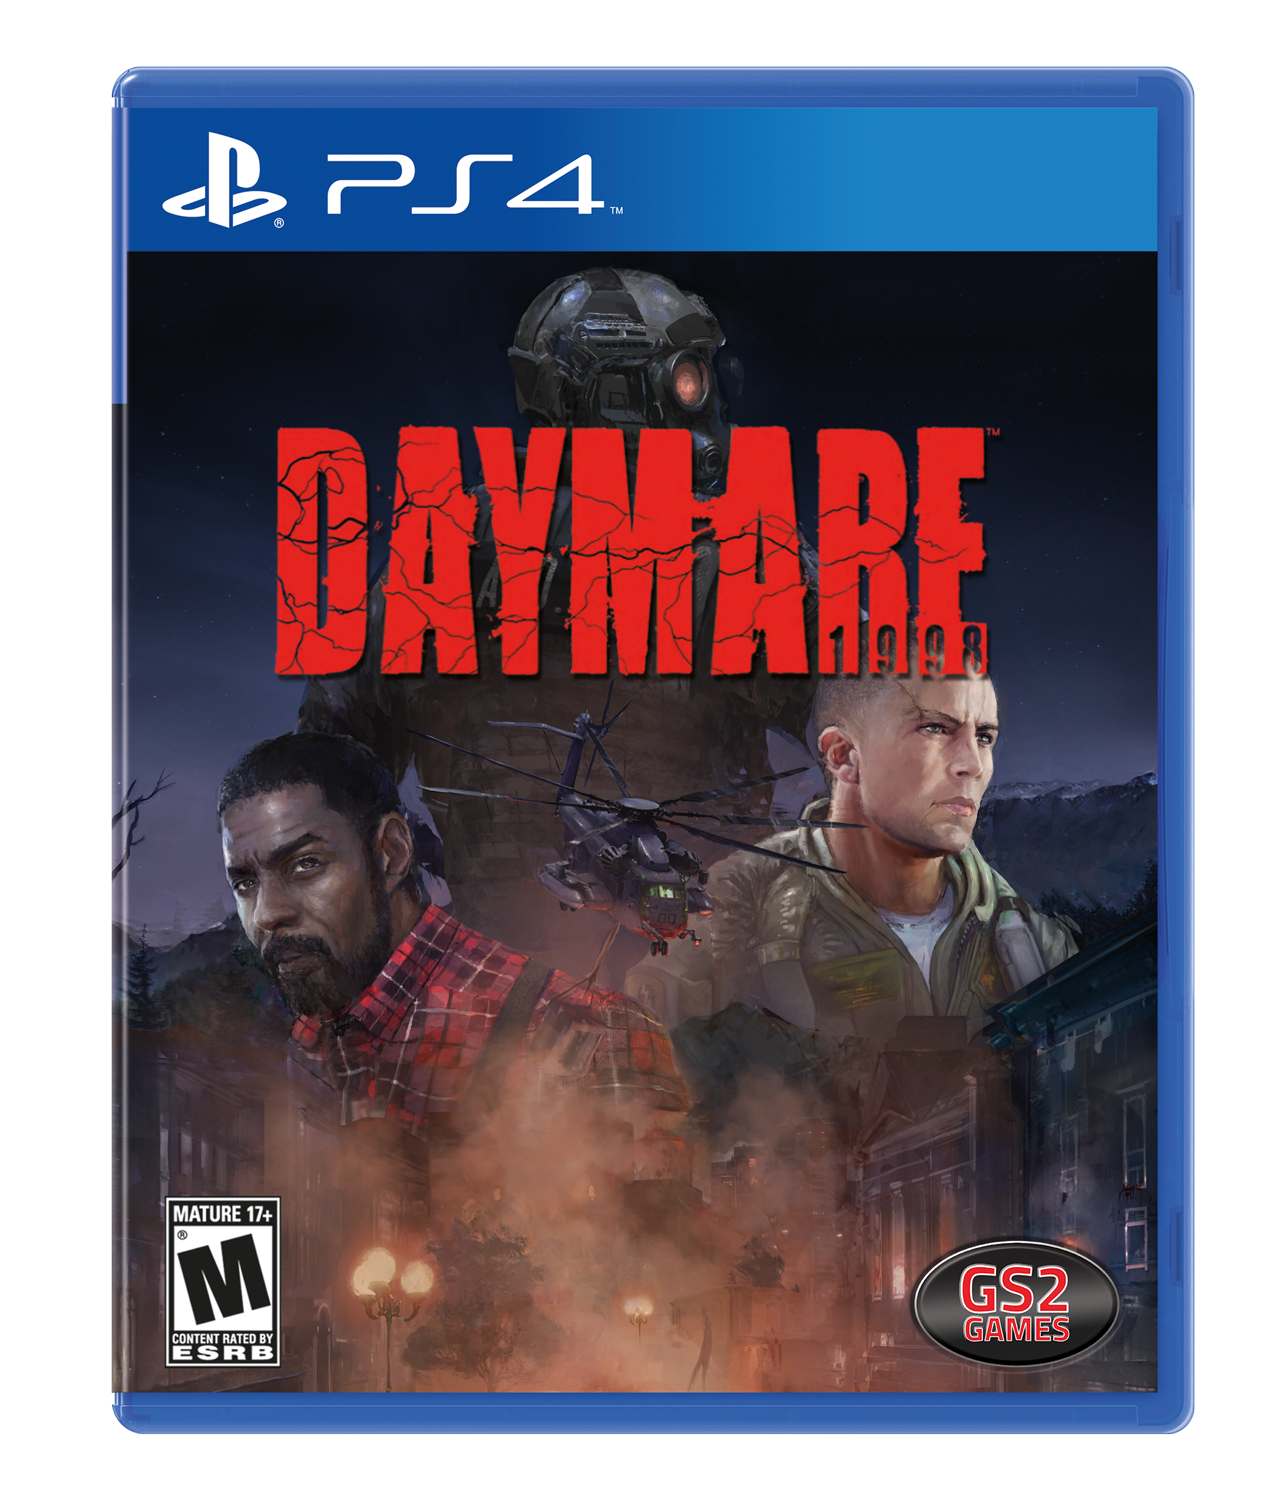 daymare 1998 xbox one release date